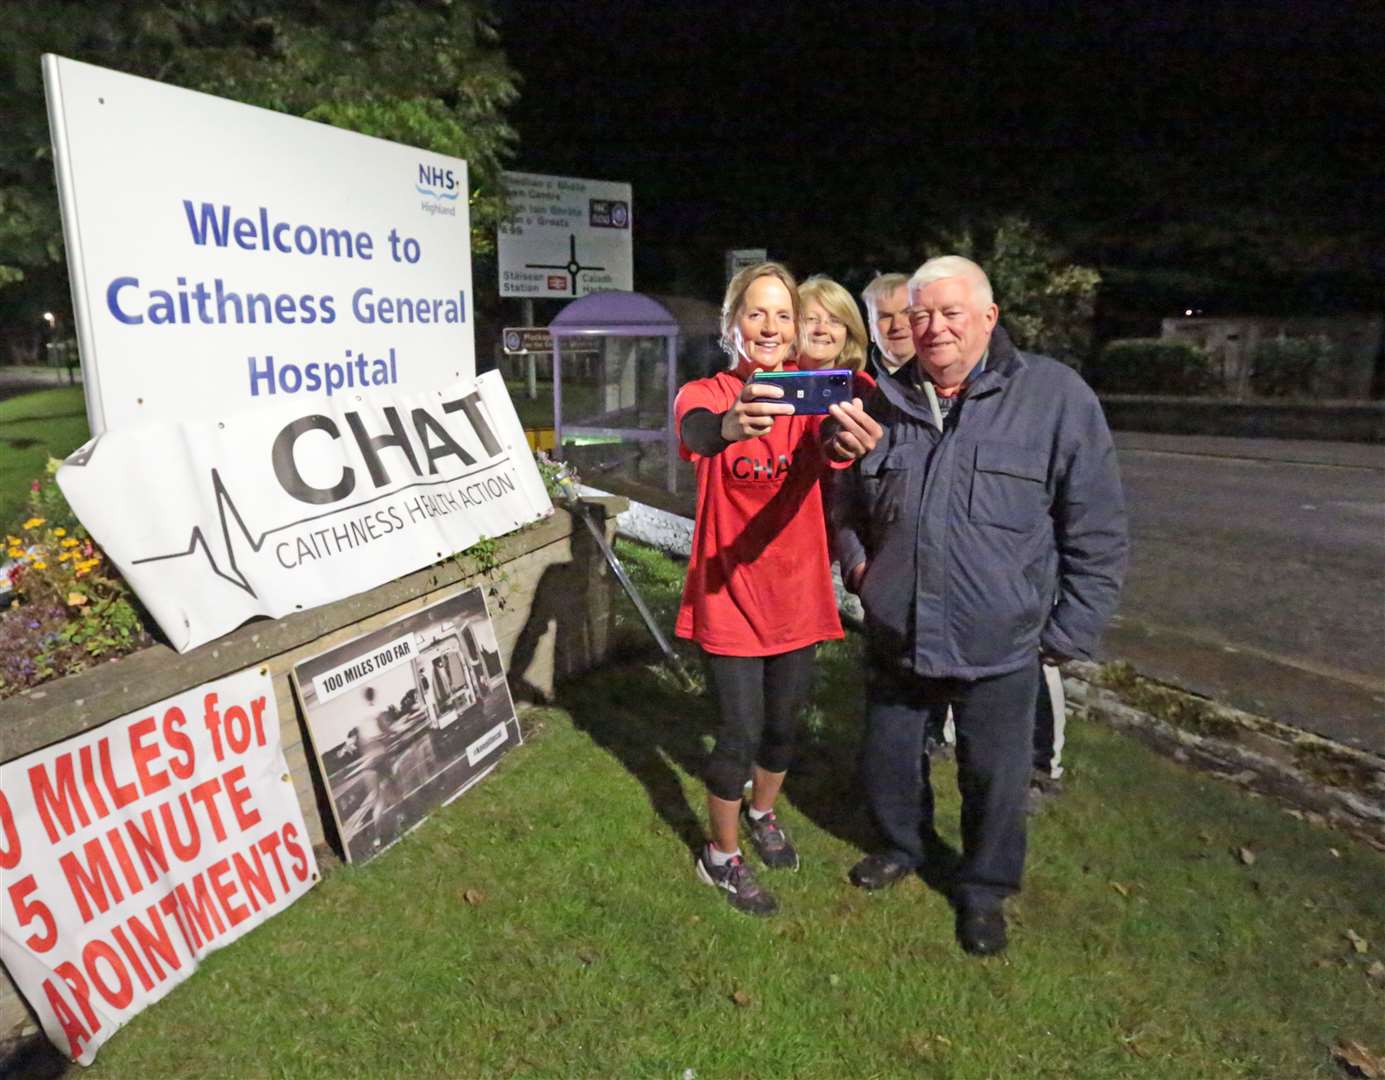 Lorna arrived at Caithness General Hospital at 4am on Wednesday and was met by CHAT's Bill Fernie (right), Derek Bremner and Maria Aitken. She took a selfie with the trio. Picture: Robert MacDonald / Northern Studios